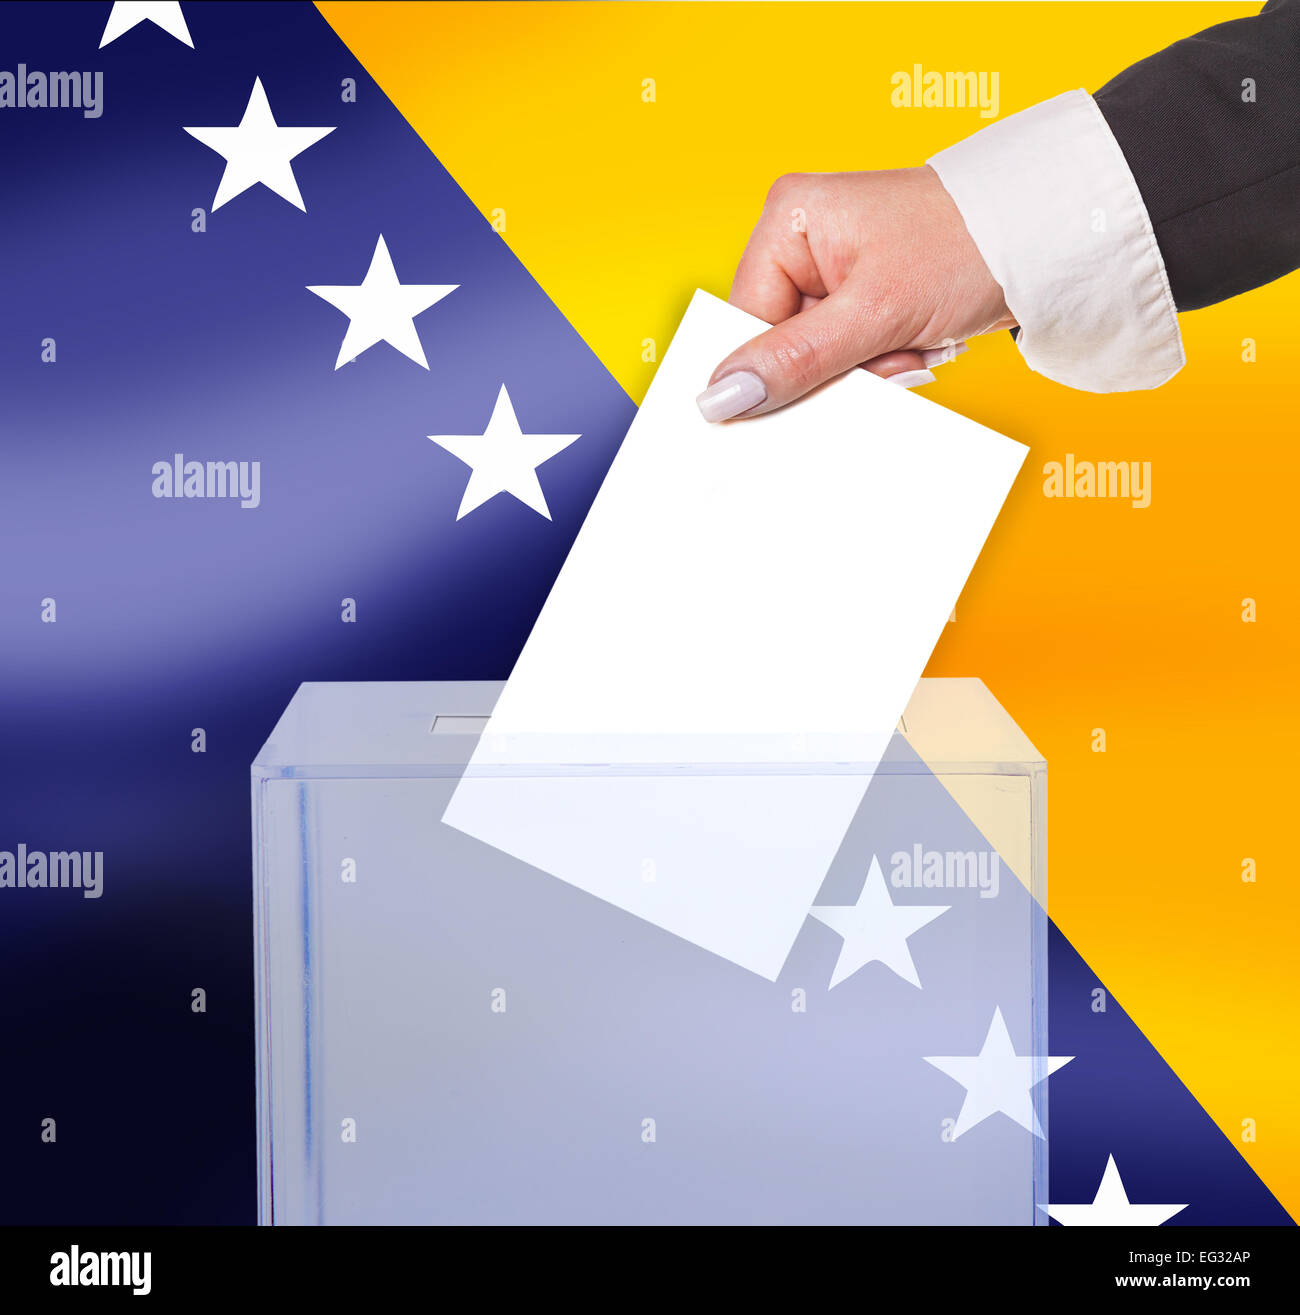 electoral vote by ballot, under the Bosnia and Herzegovina flag Stock Photo